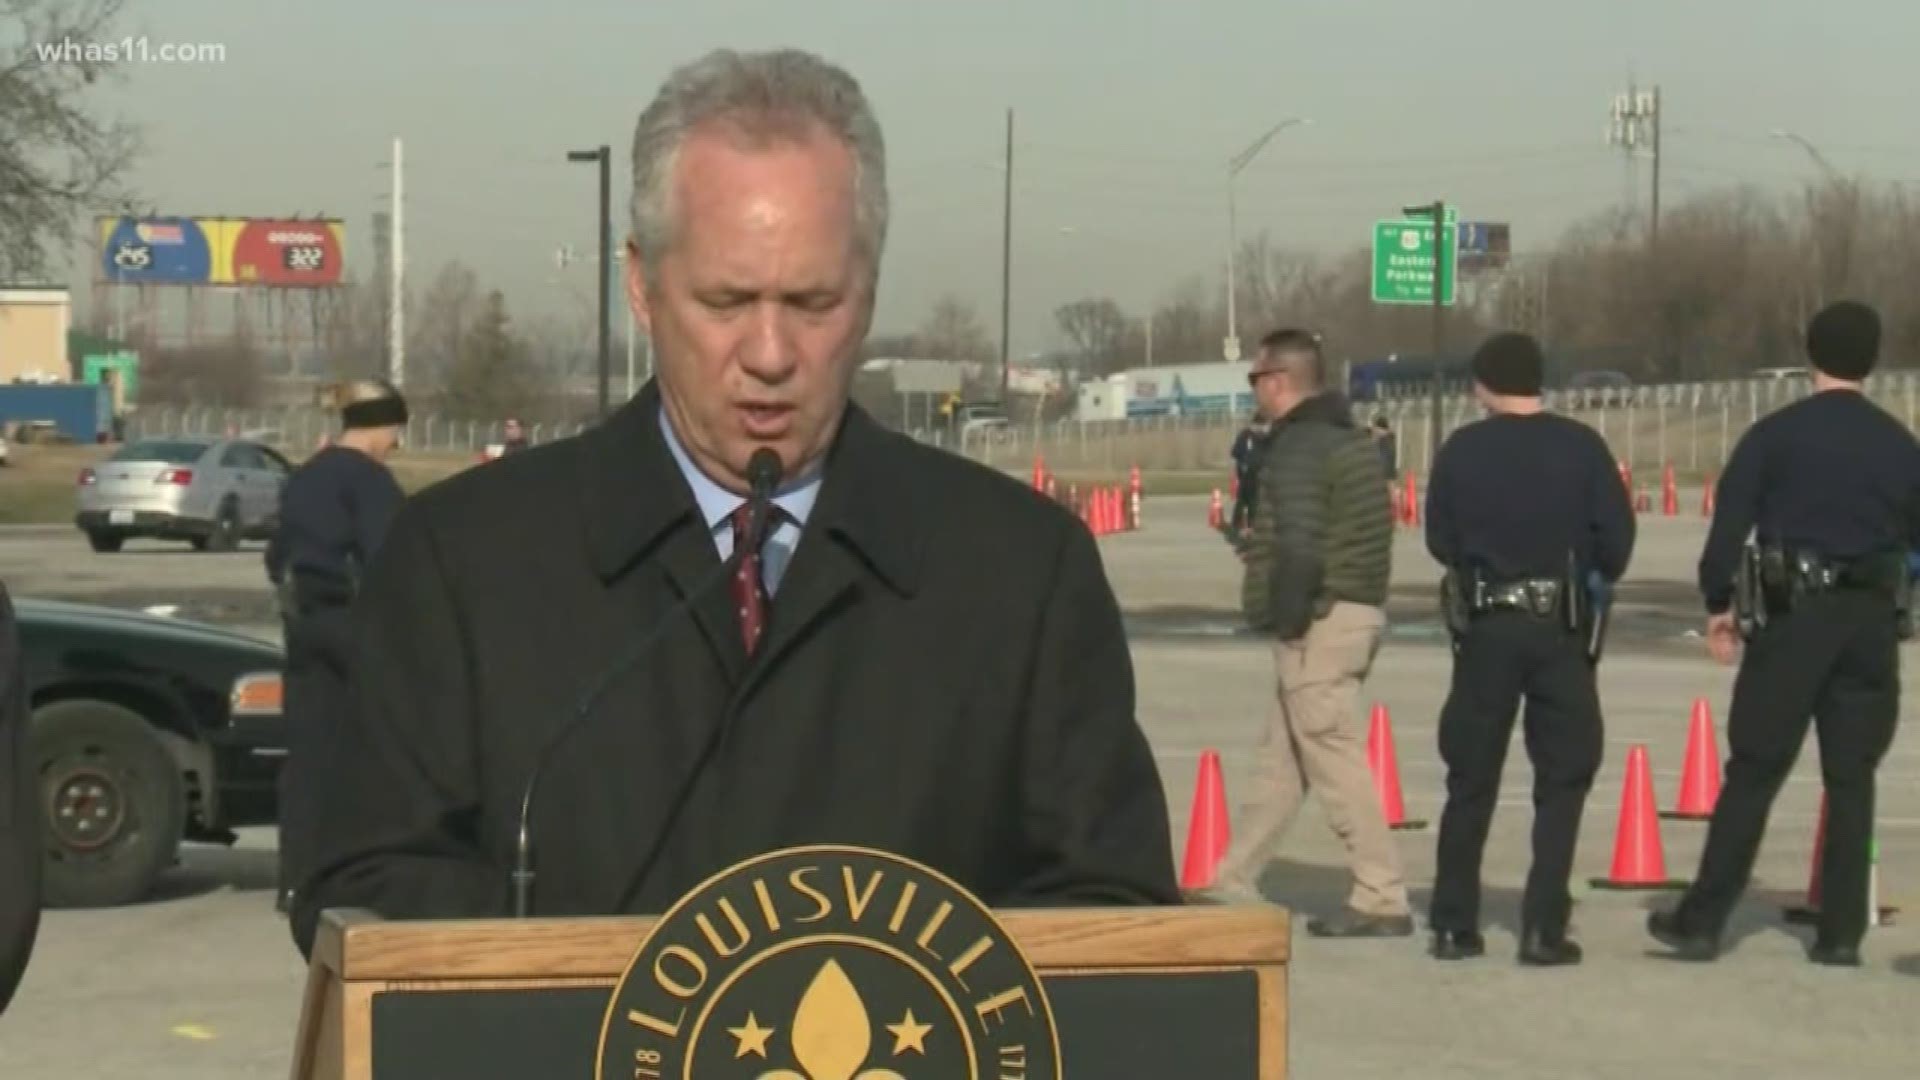 Could raising Kentucky's sales tax help with a budget shortfall? Mayor Greg Fischer says a combination of cuts and revenue is what will fix the $65 million budget gap.